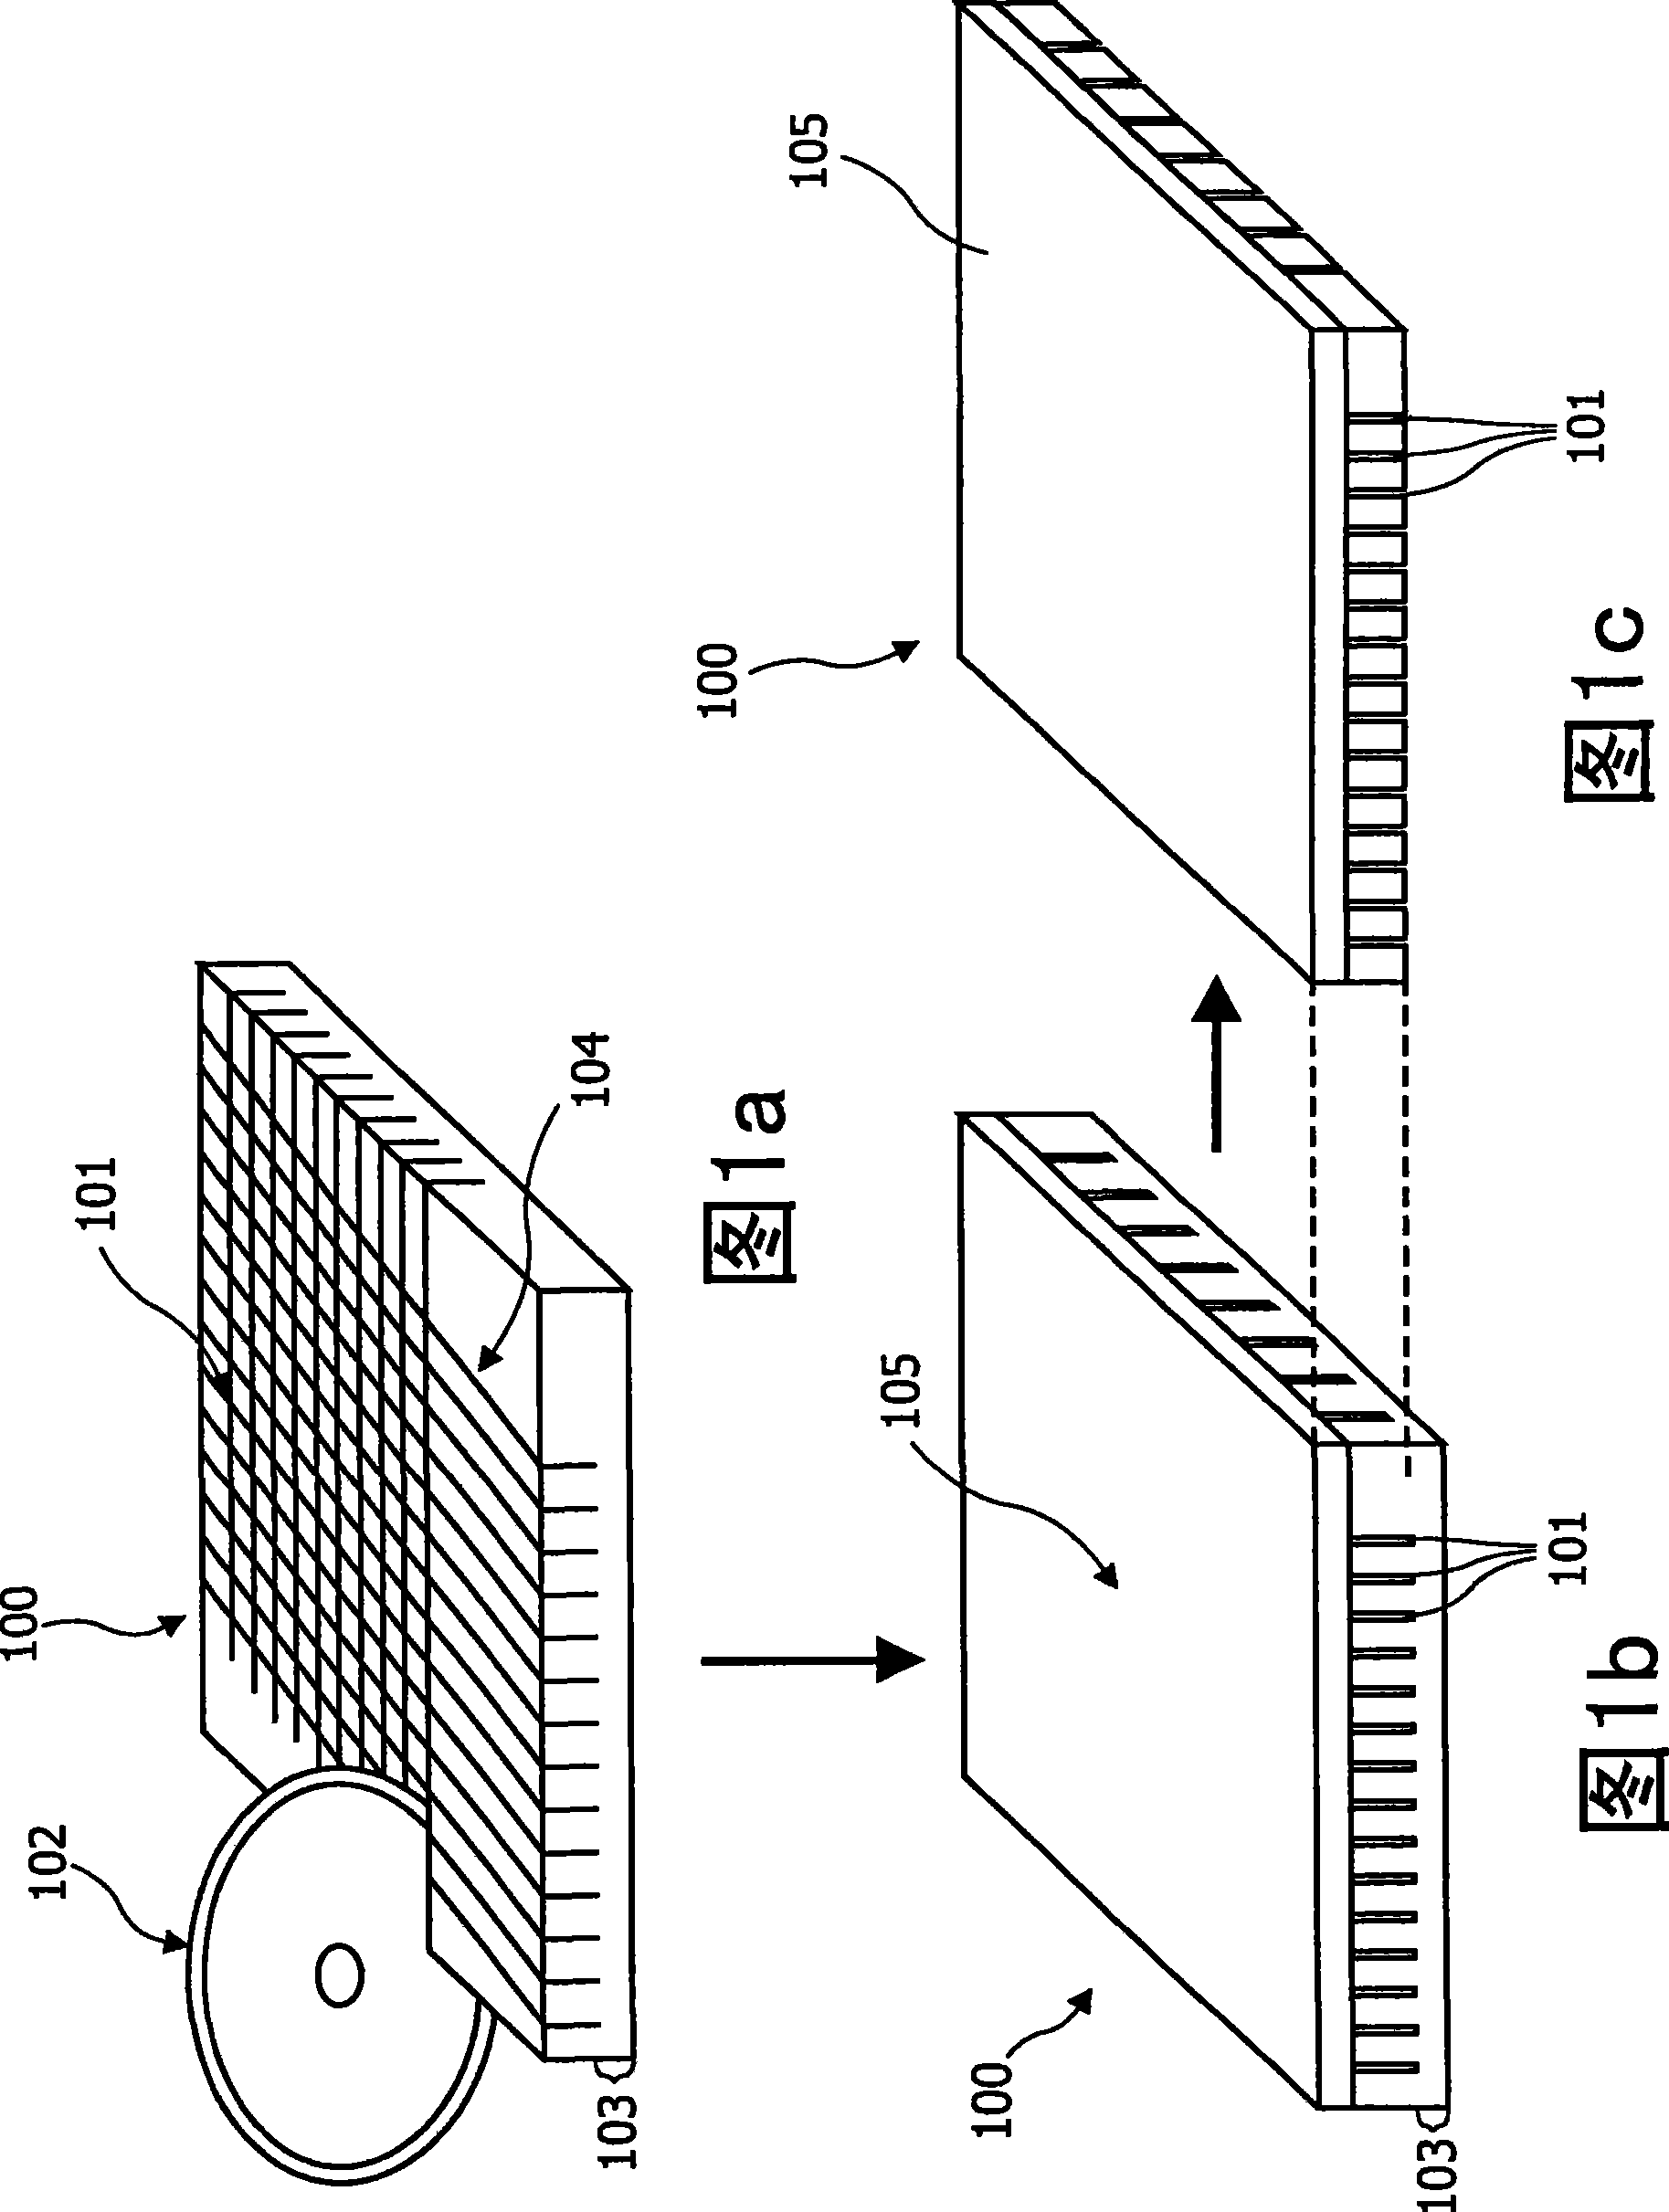 Scintillation element, scintillation array and method for producing the same